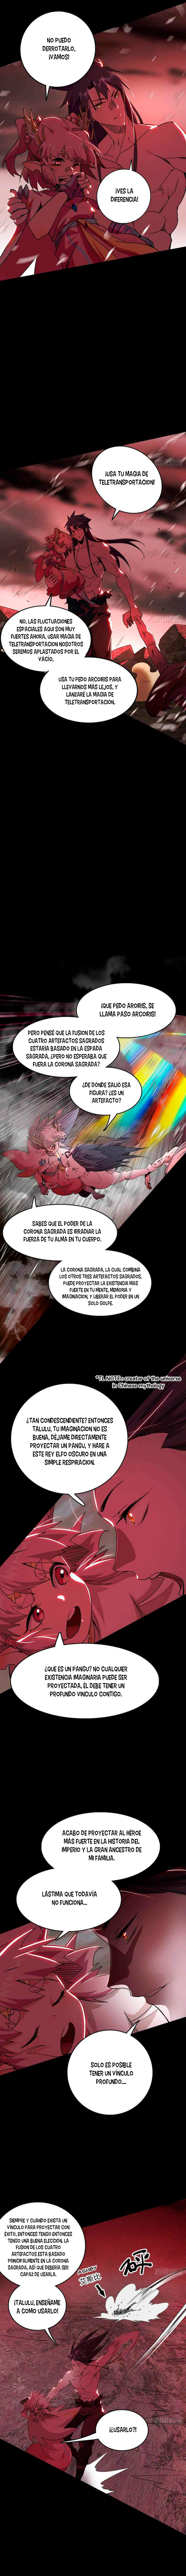 Manga Soy un dios maligno Chapter 258 image number 7